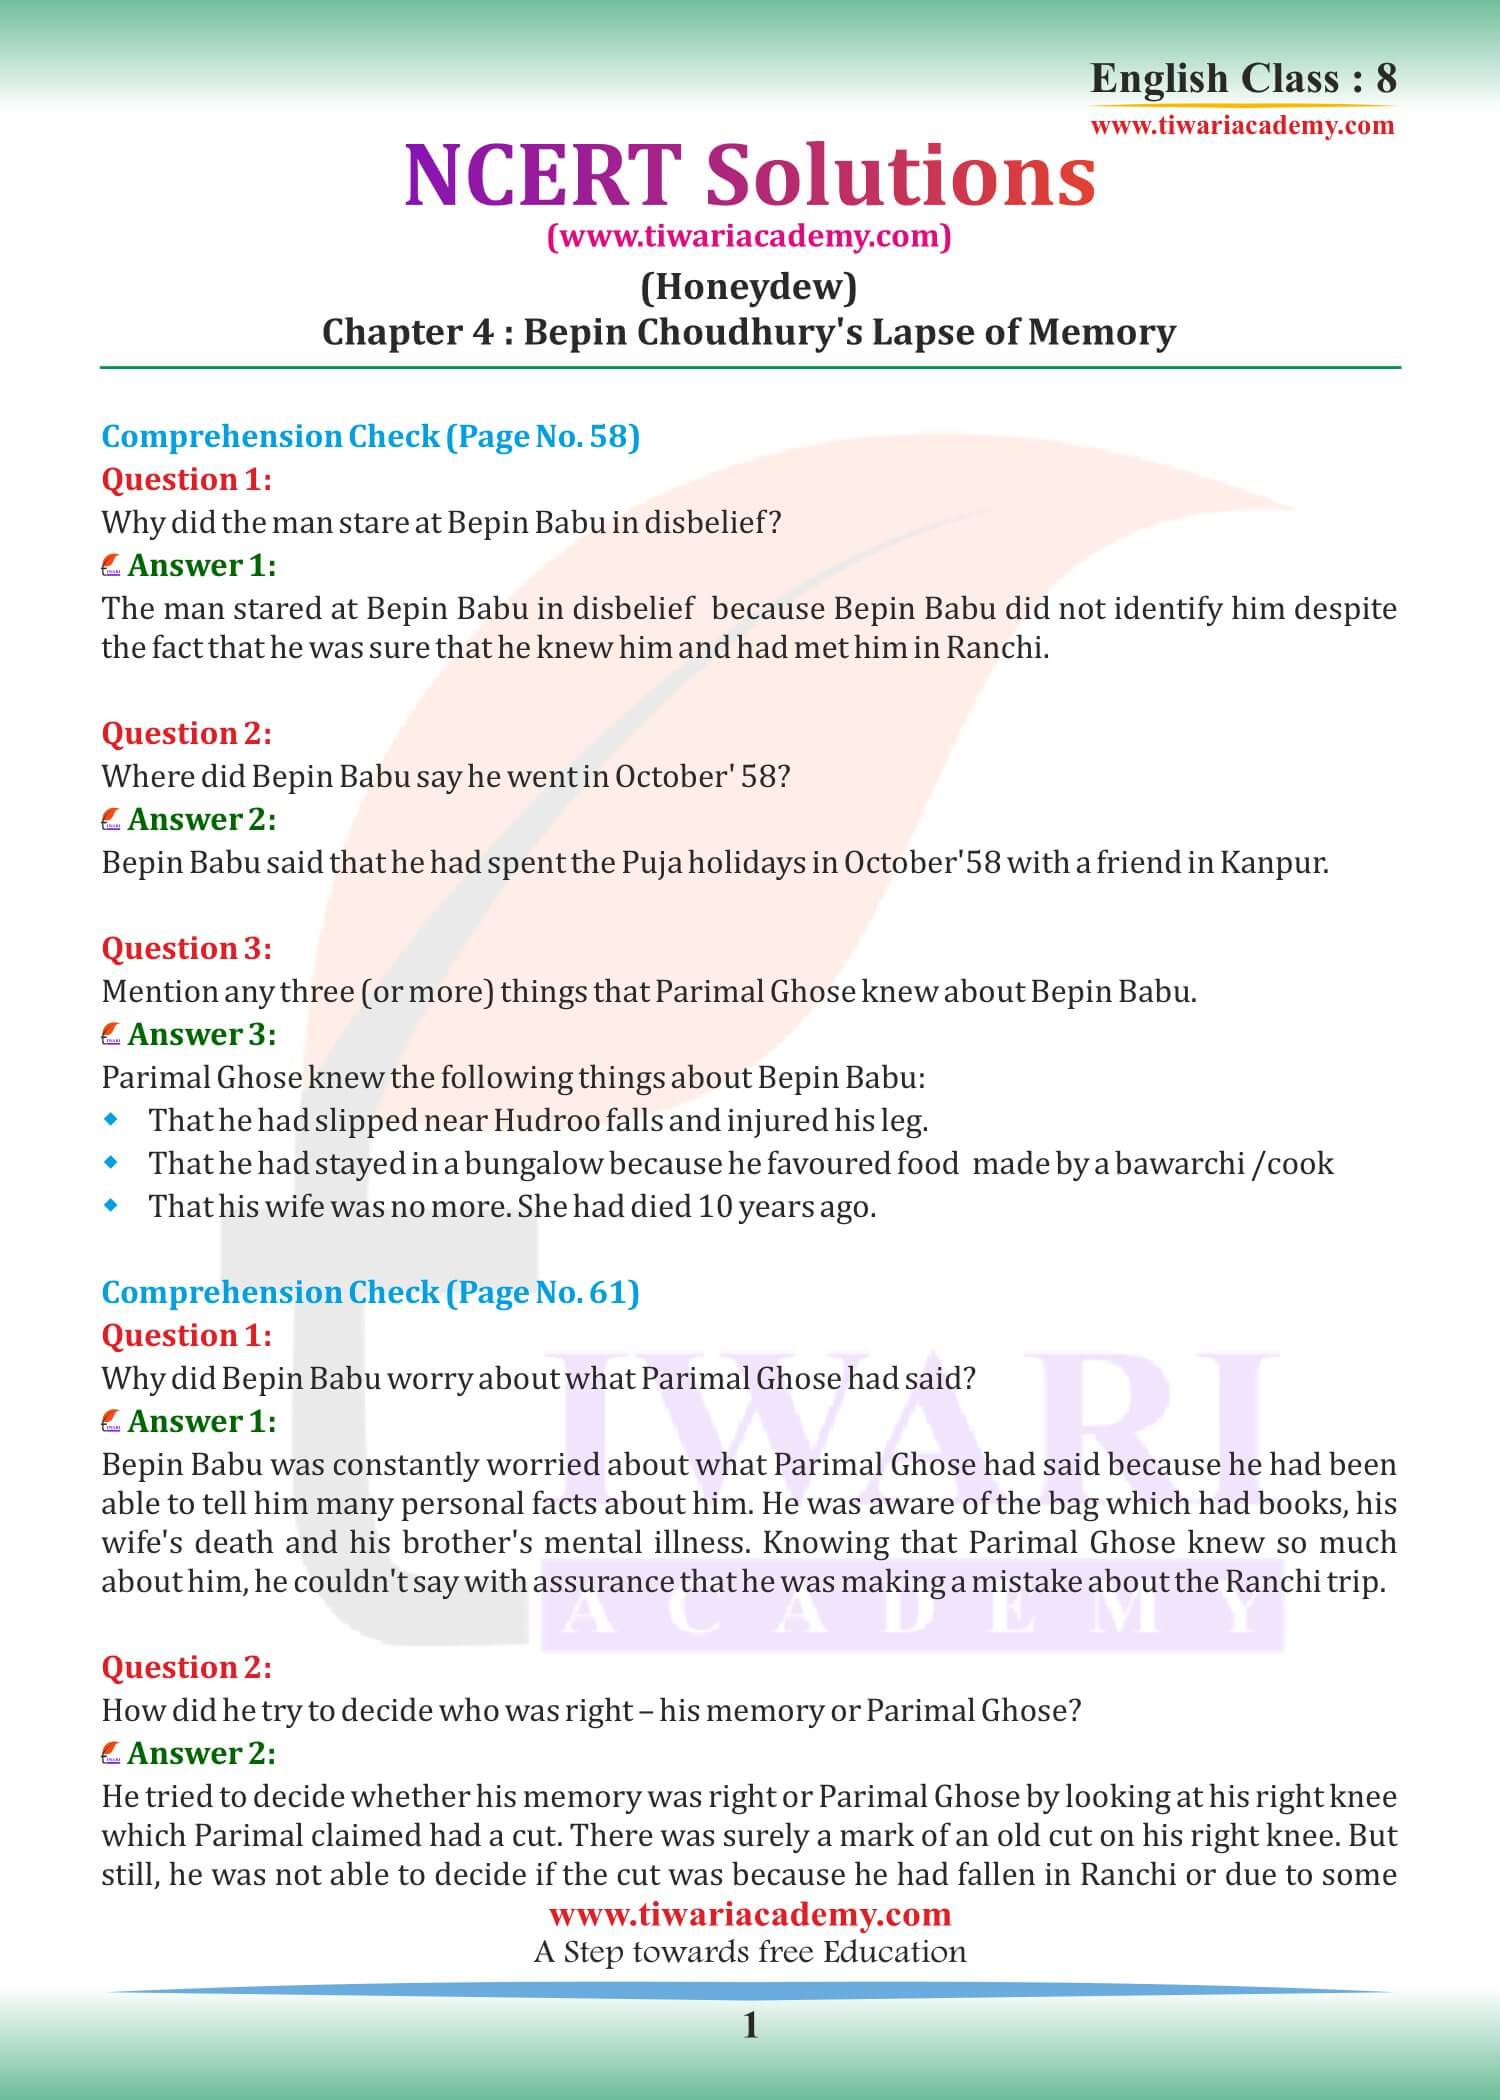 NCERT Solutions for Class 8 English Honeydew Chapter 4 Bepin Chaudhury Lapse of Memory